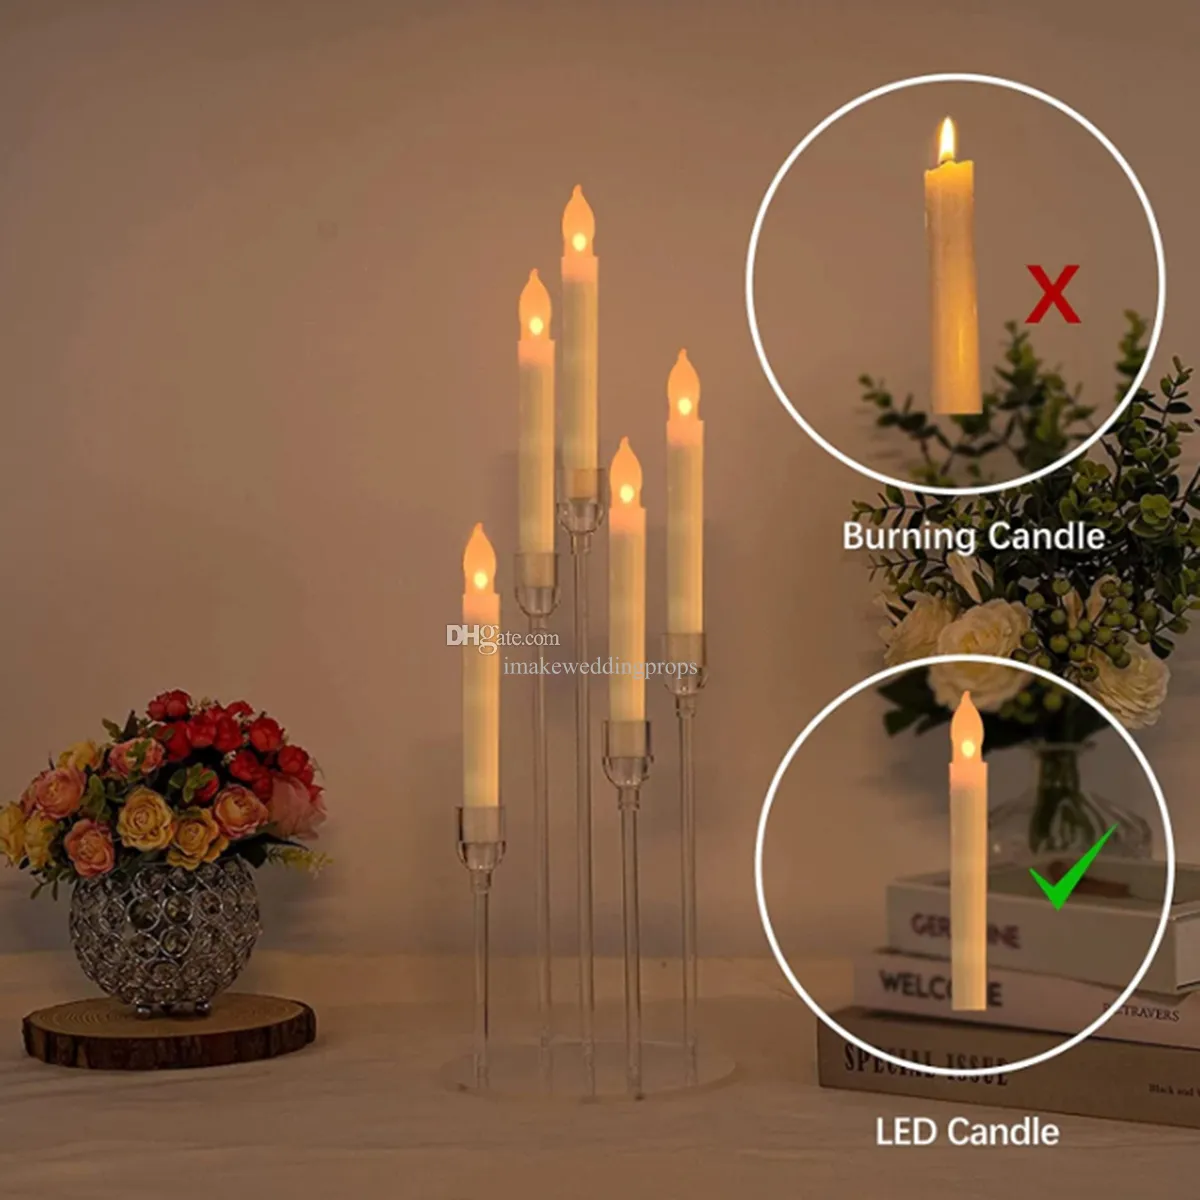 Acrylic Candelabra 5 Arms Candle Holder Centerpieces for Wedding Living Room Dinner Table Christmas Decoration imake864